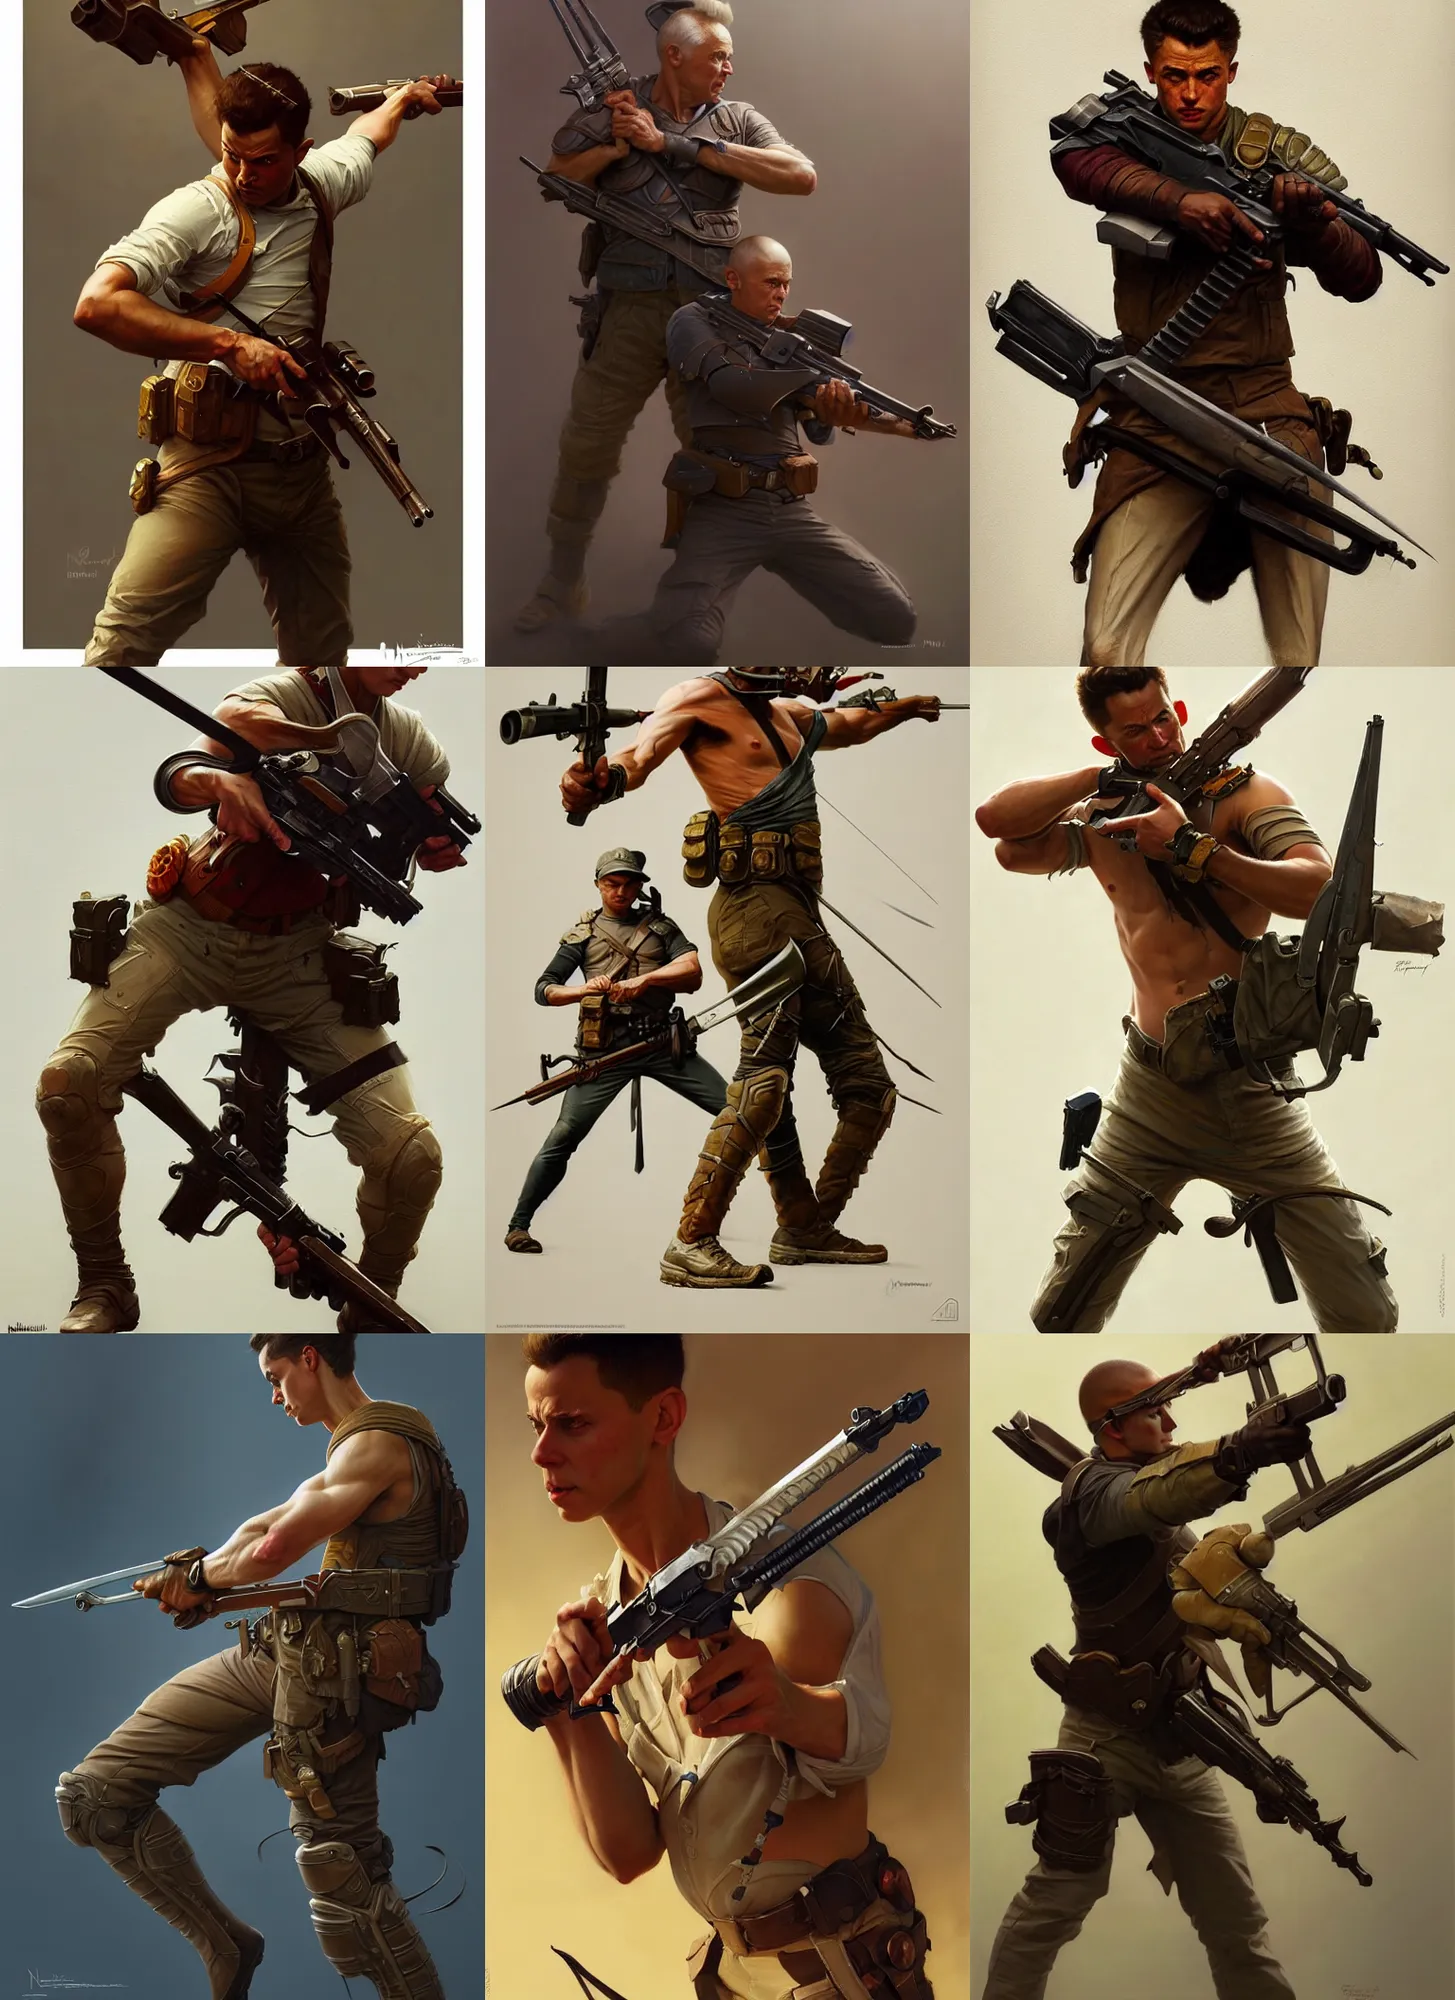 41 Action Reference Poses - SetPose.com